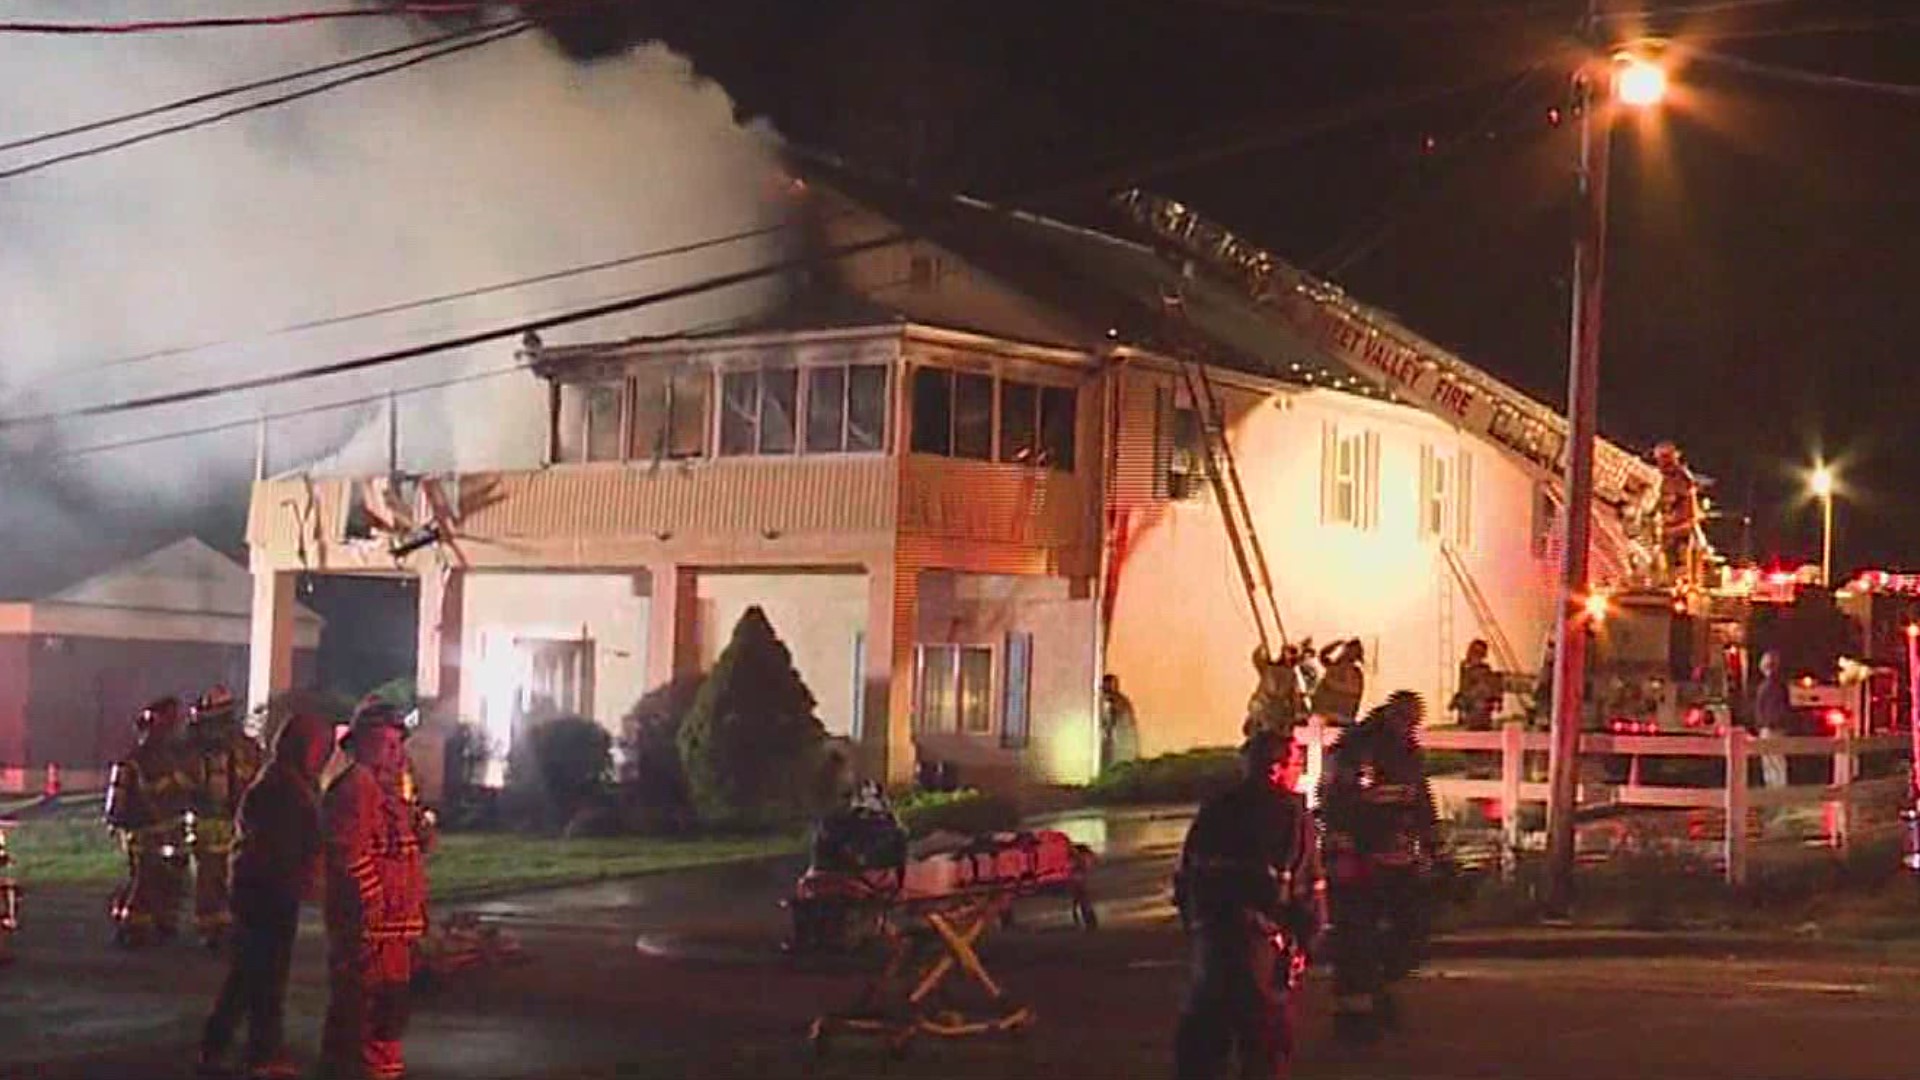 A fire wrecked a funeral home and an apartment in Luzerne County early Monday morning.